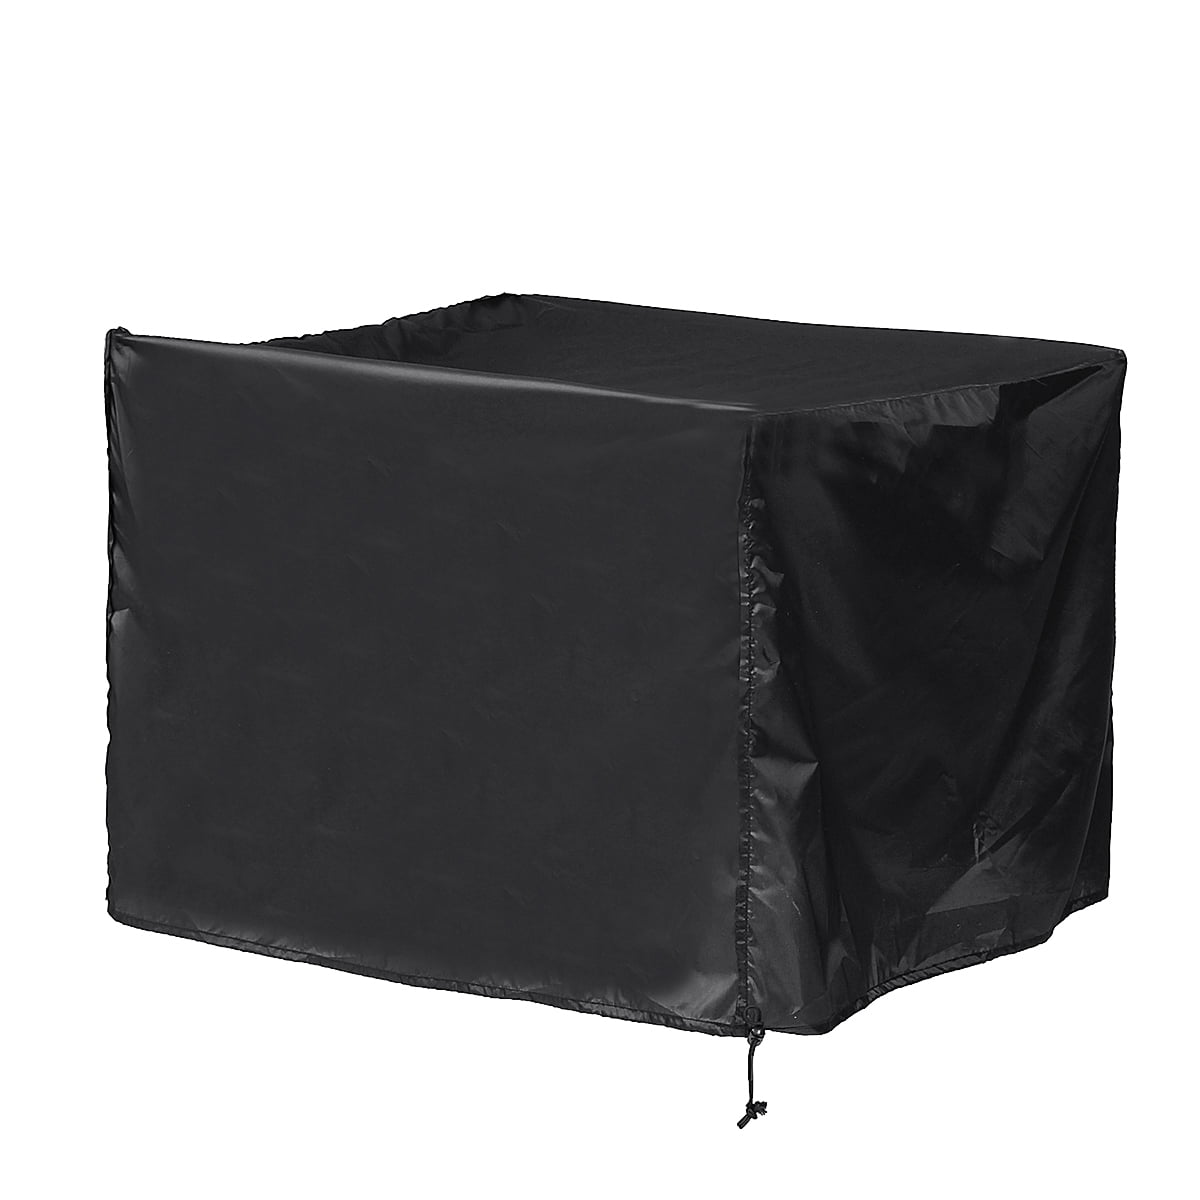 18 Month Warranty95x 92x 50 cm SIRUITON Cooler Cart Cover Oxford Polyester Outdoor Waterproof Cooler Cover Black